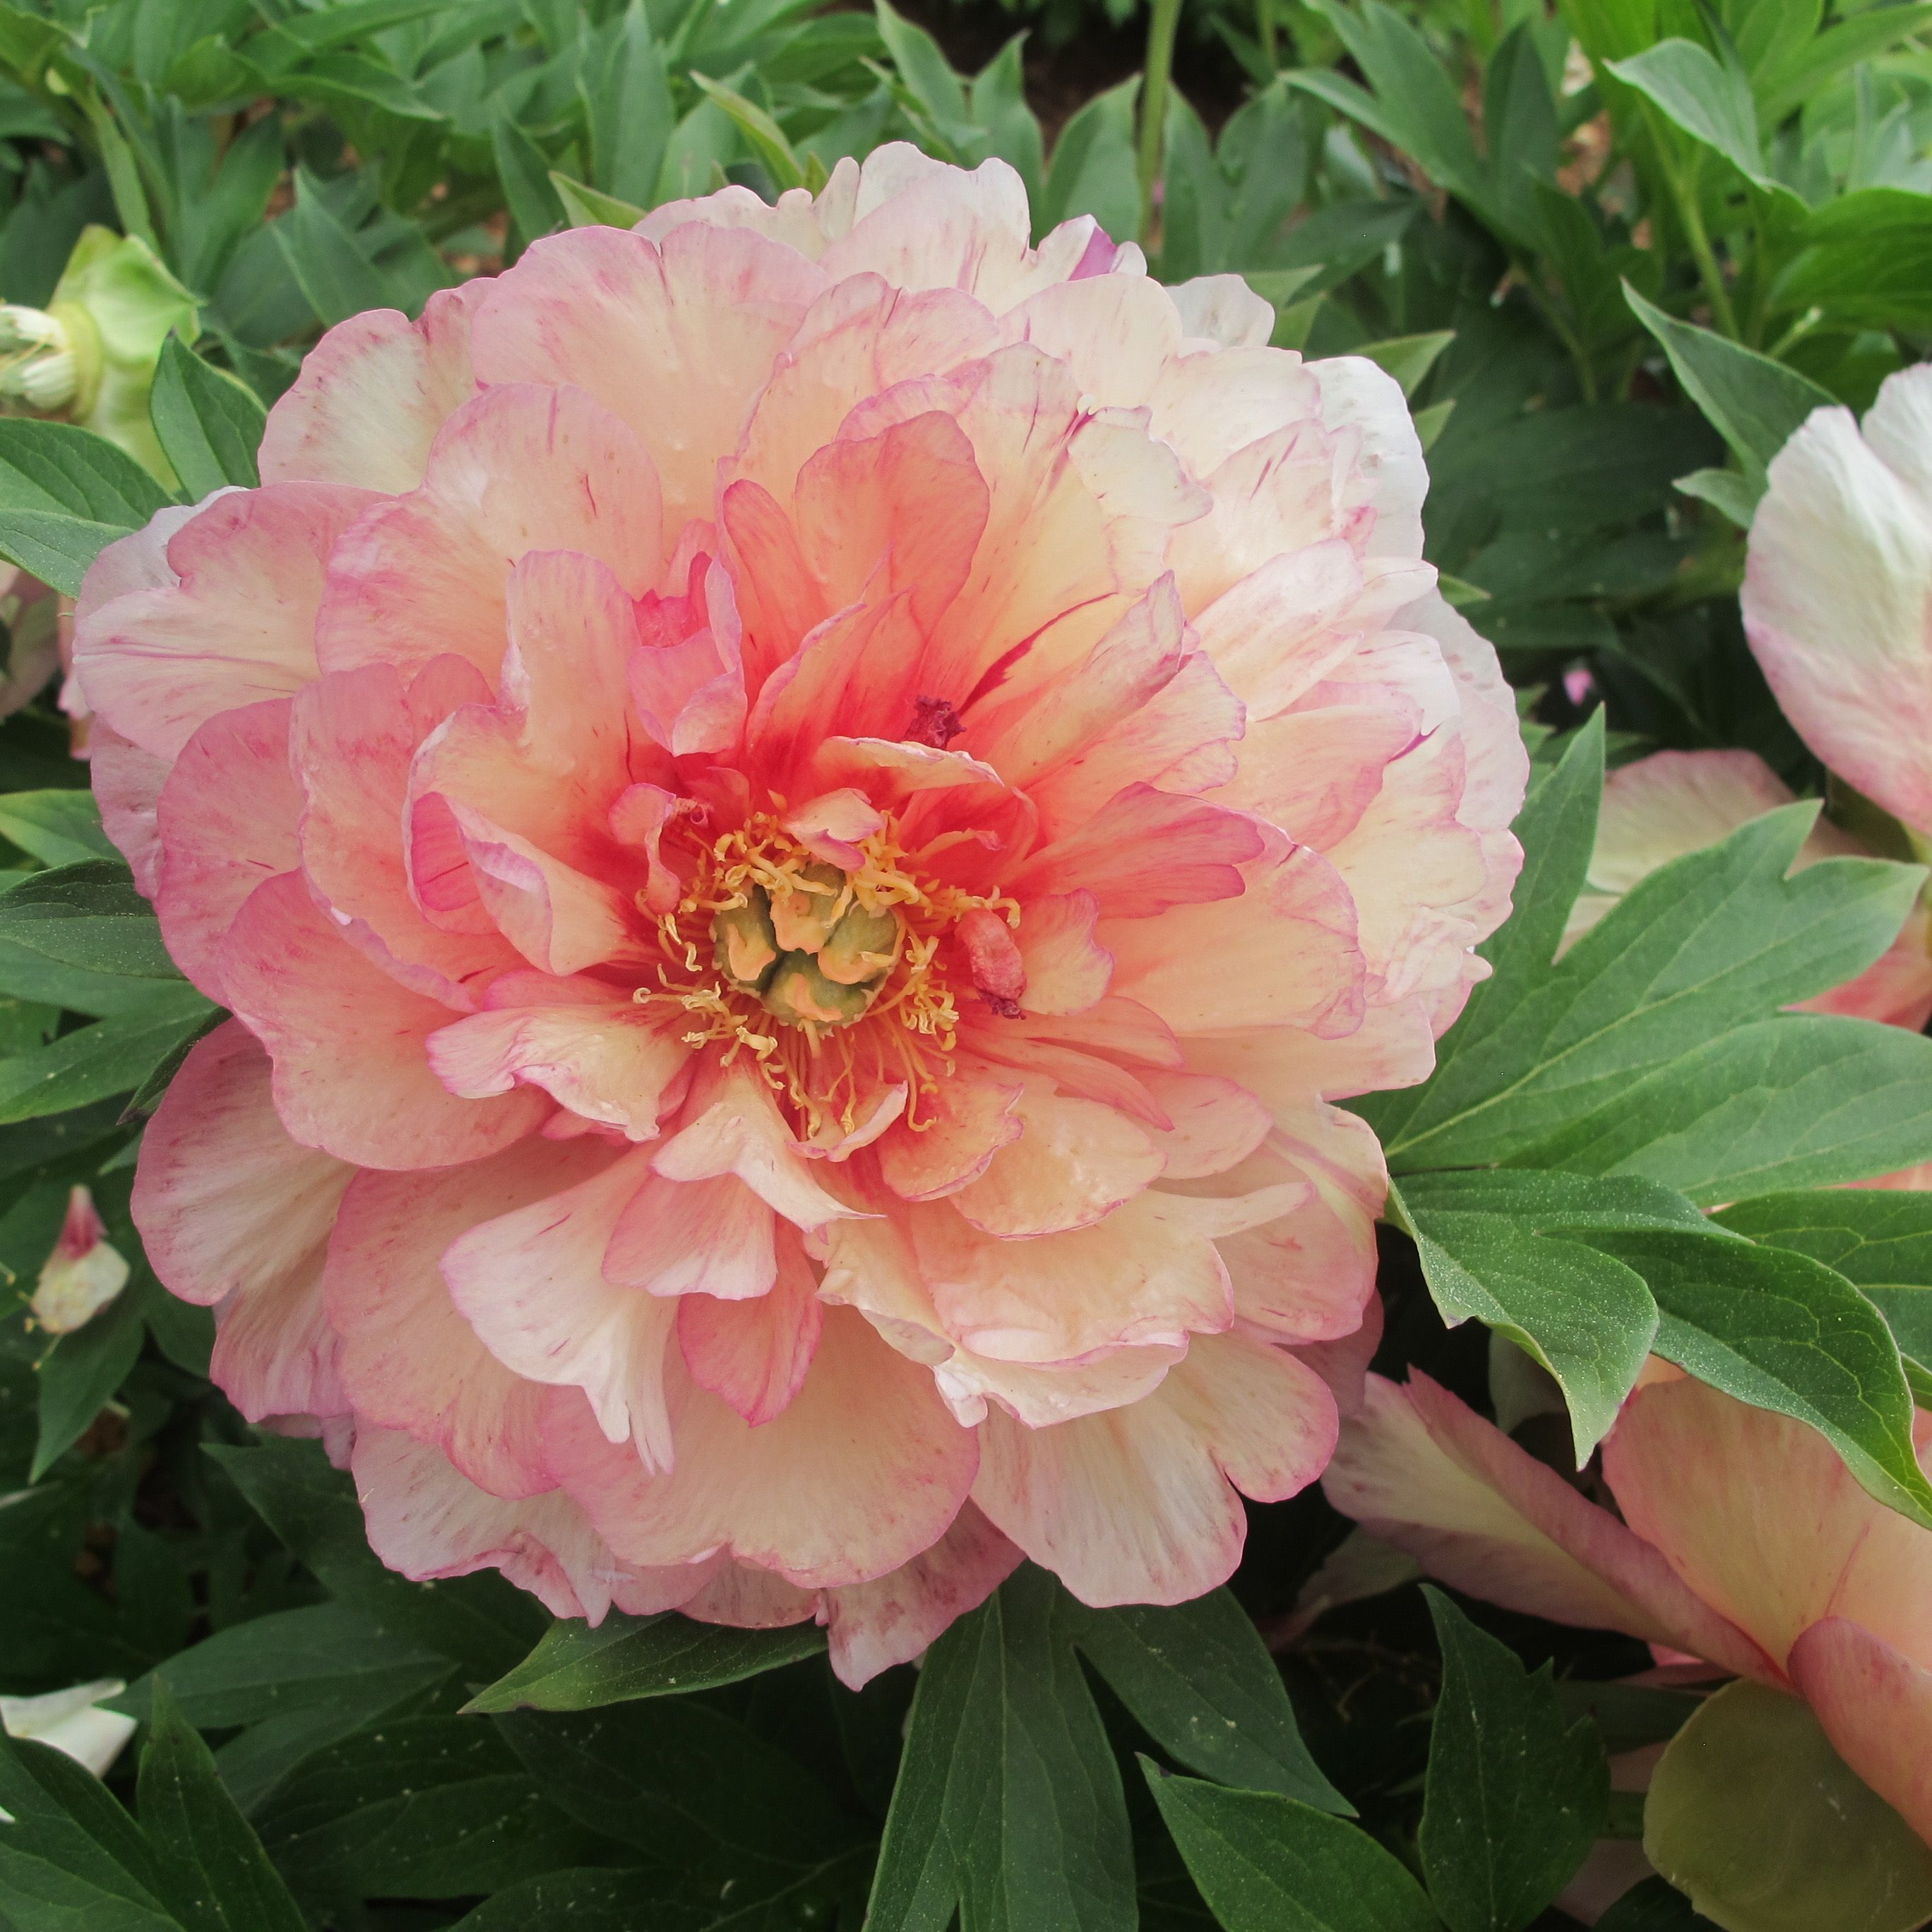 images/plants/paeonia/pae-truly-scrumptious/pae-truly-scrumptious-0004.JPG